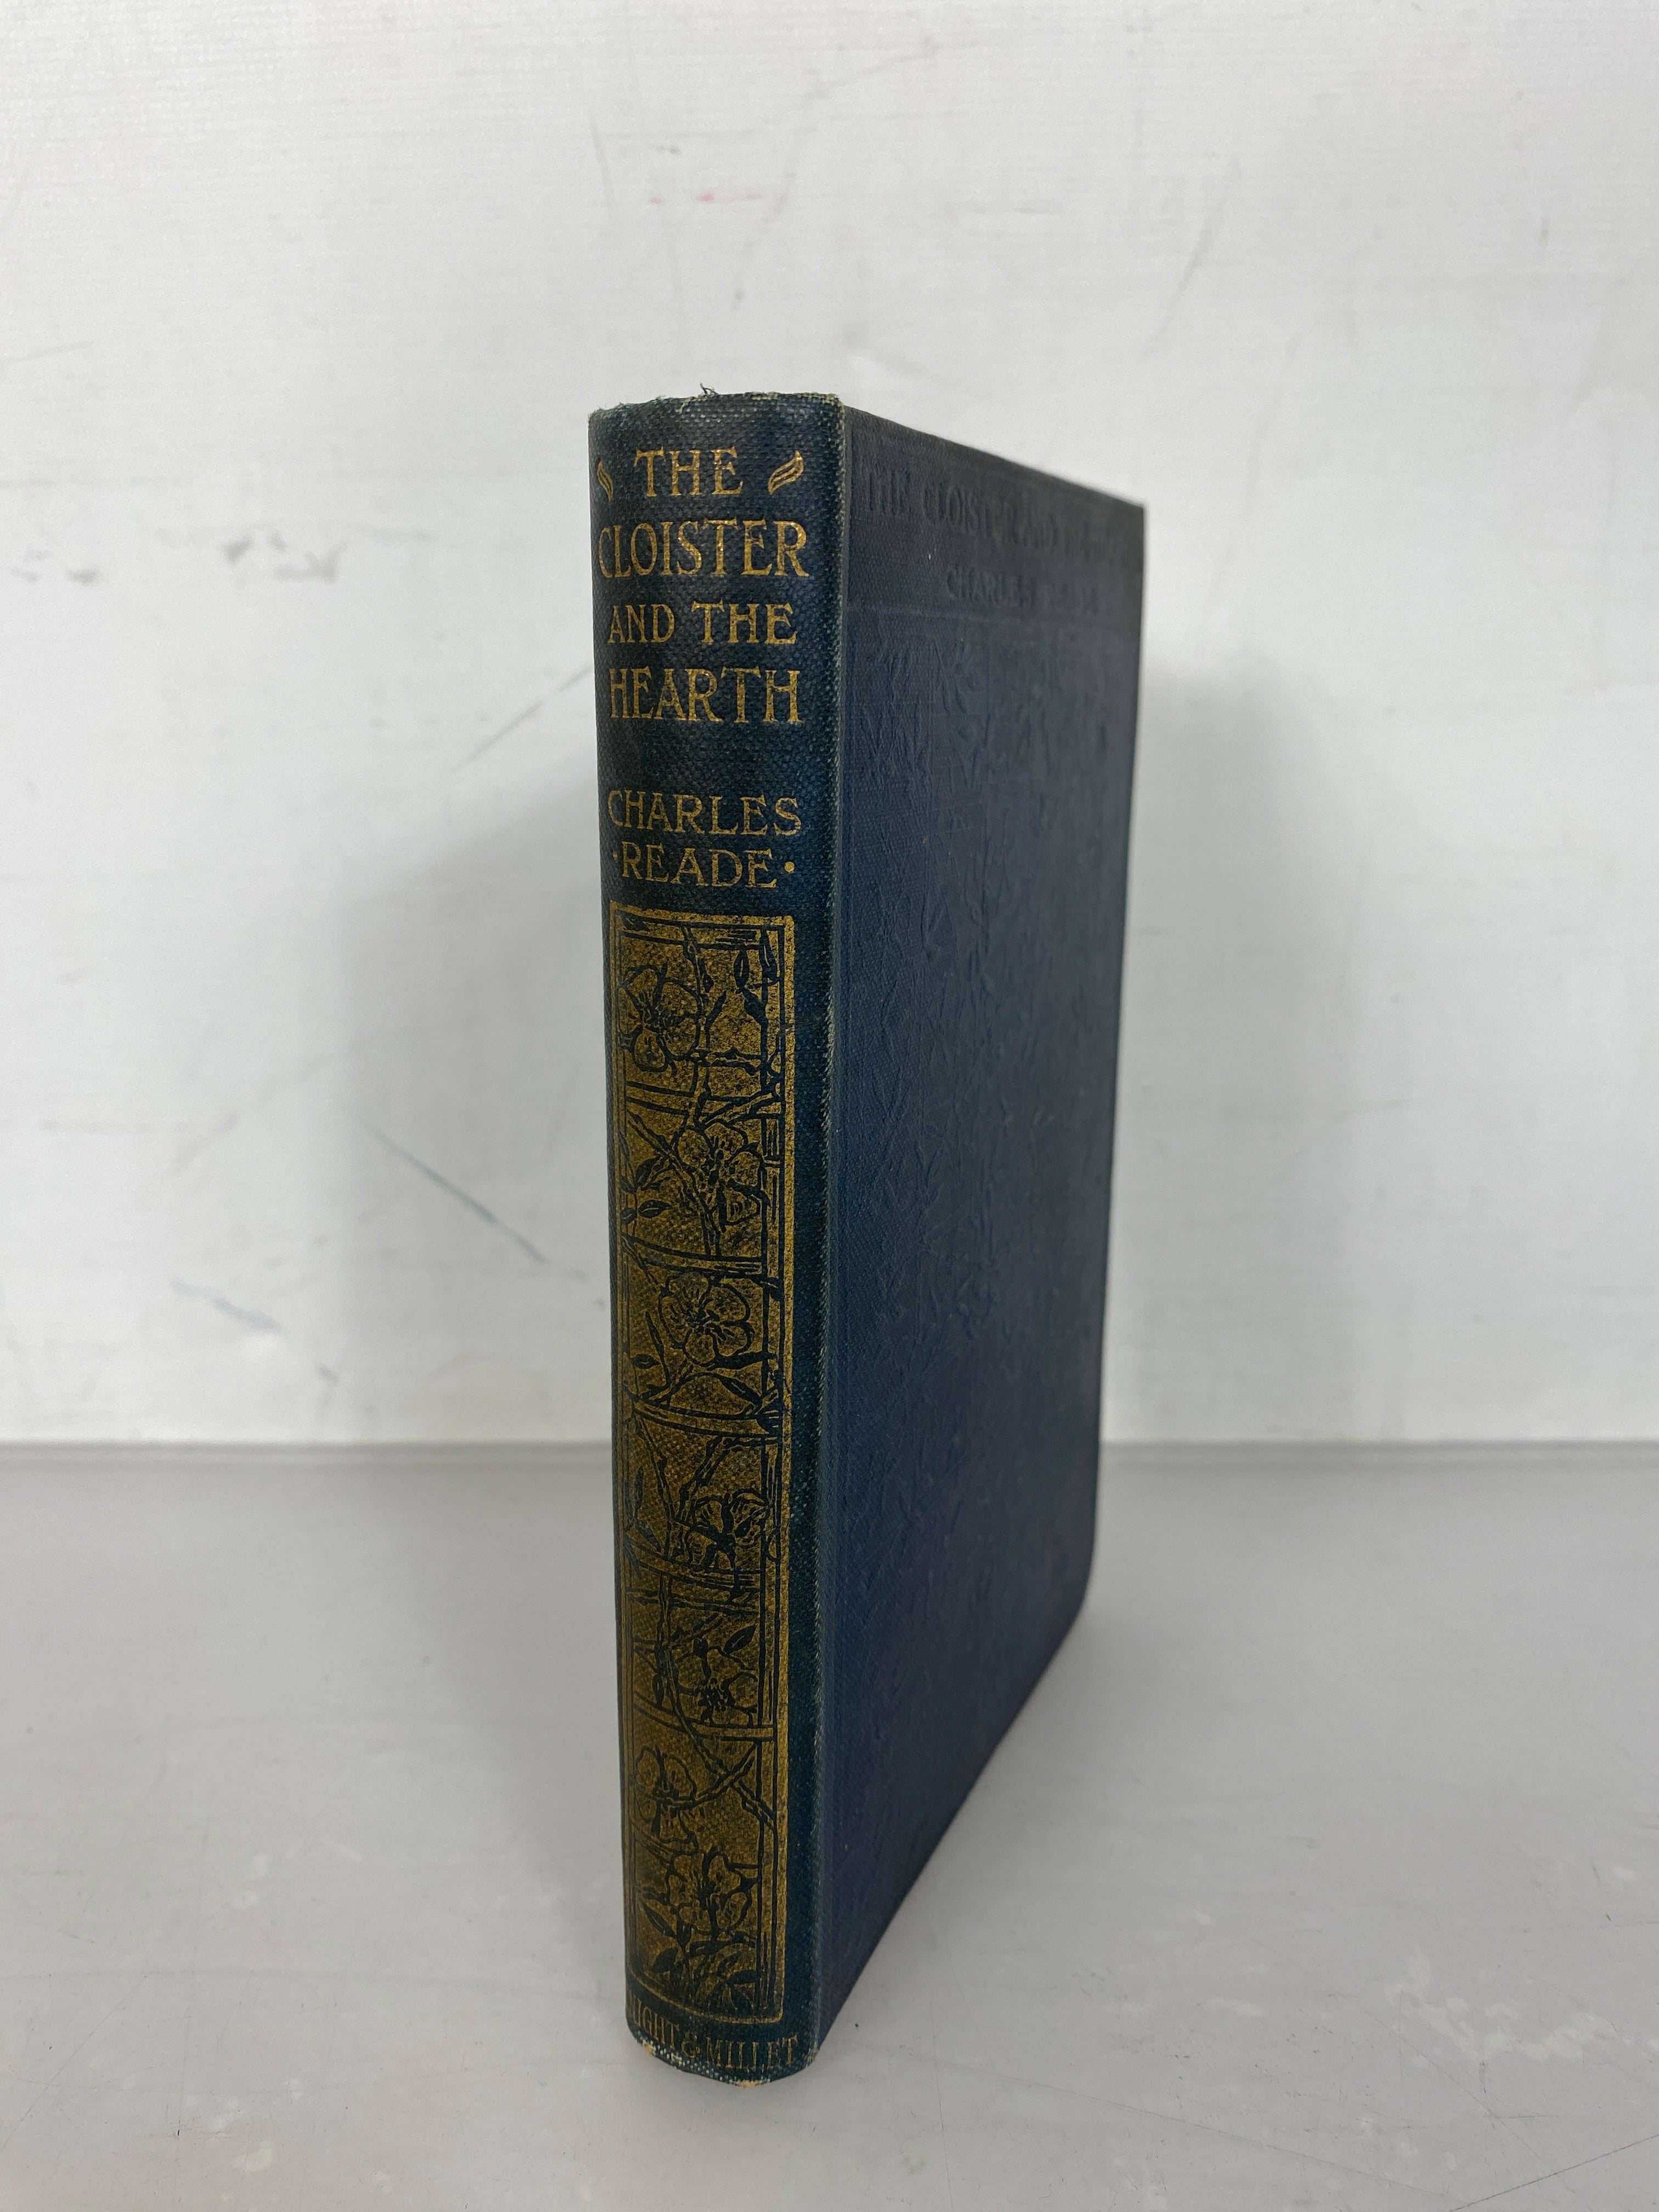 The Cloister and the Hearth by Charles Reade Fine Paper Edition Knight & Millet HC